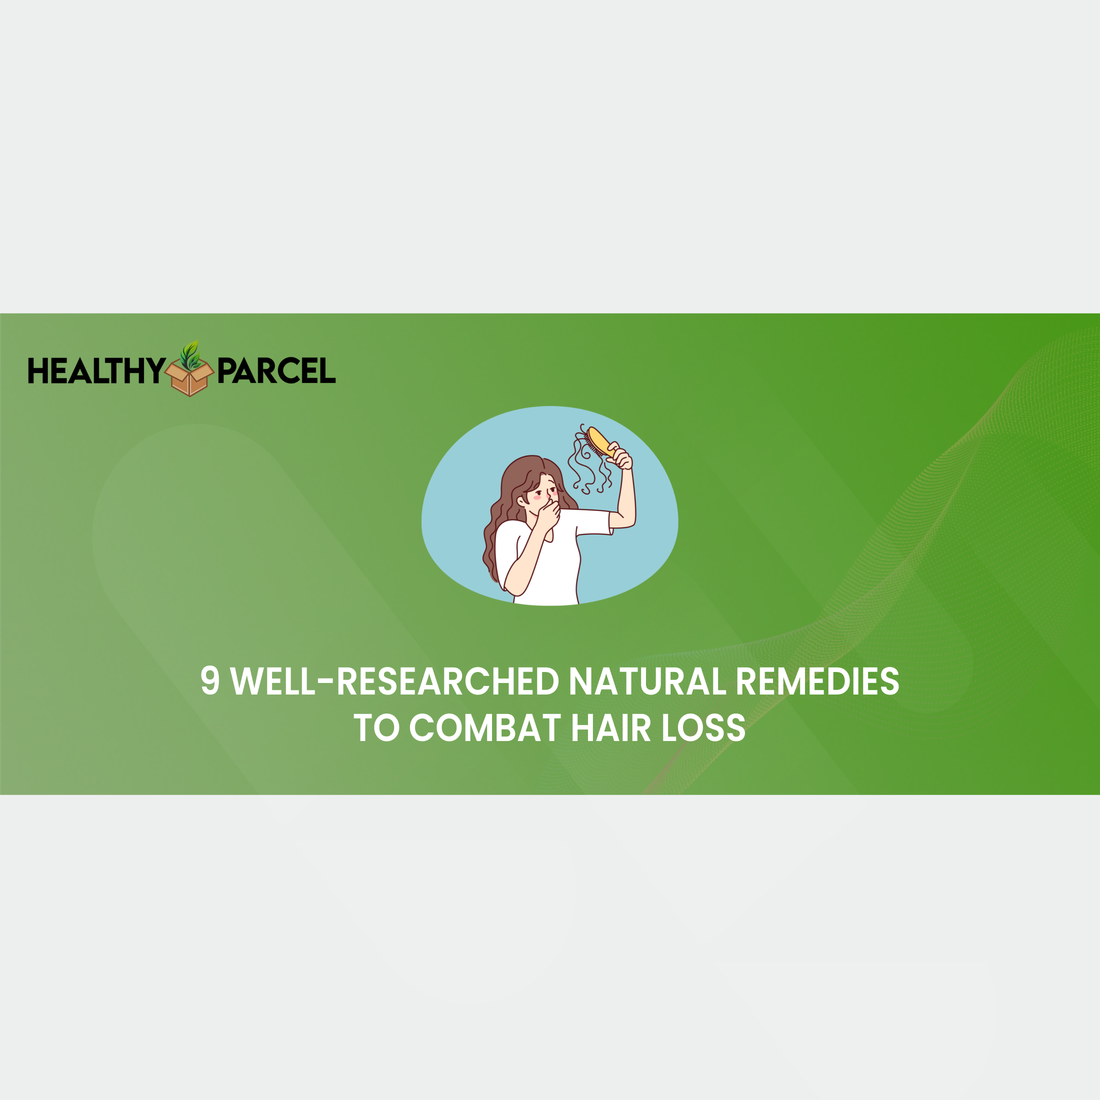 9 Well-Researched Natural Remedies to Combat Hair Loss